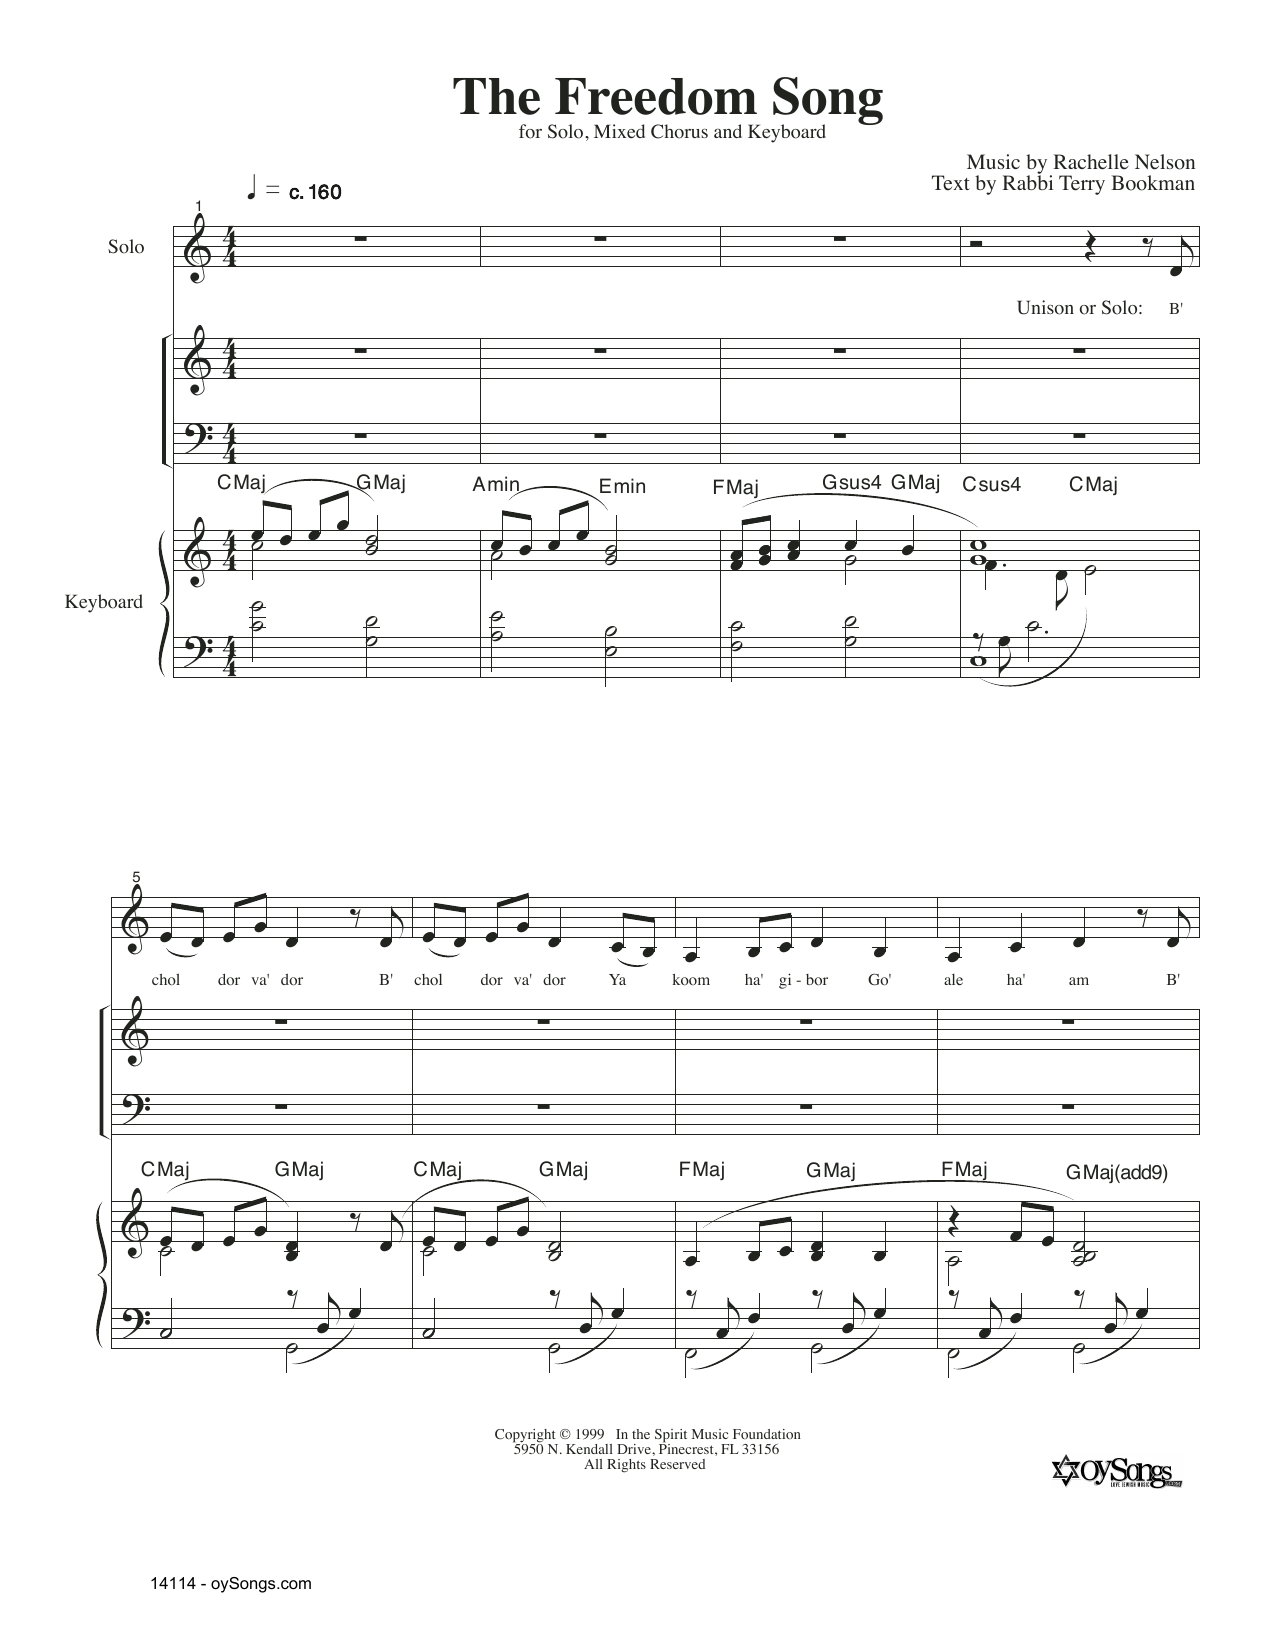 Download Rachelle Nelson The Freedom Song Sheet Music